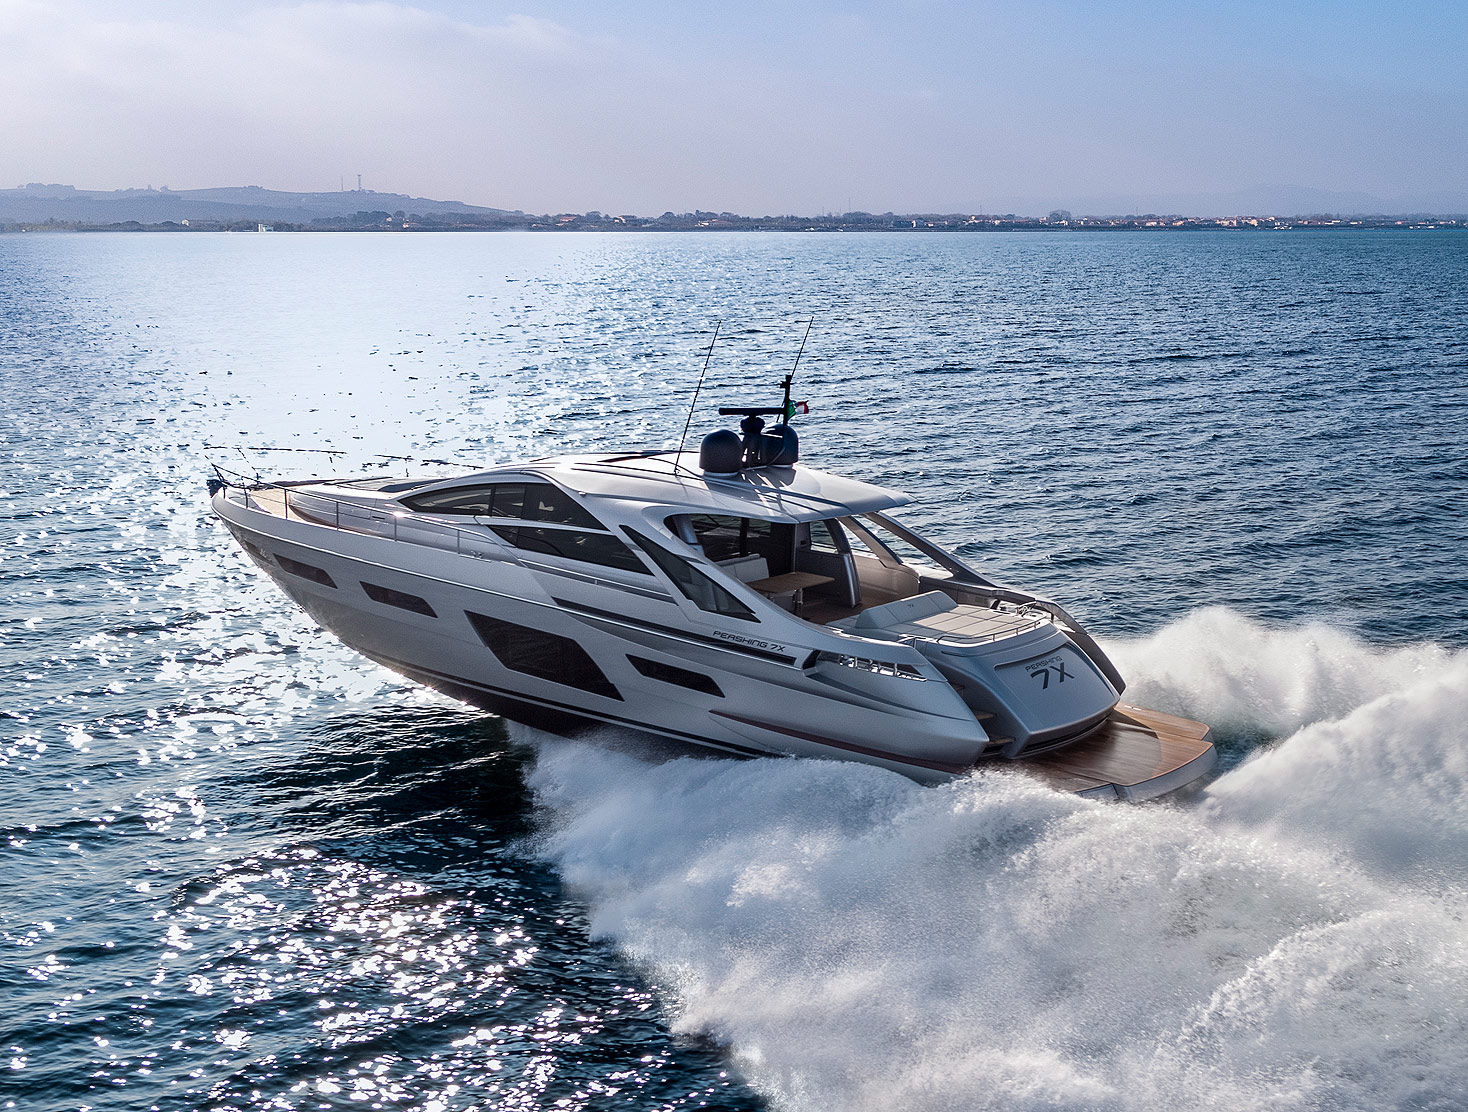 Pershing 7X Yacht - Designed To Make Its Competition Weep